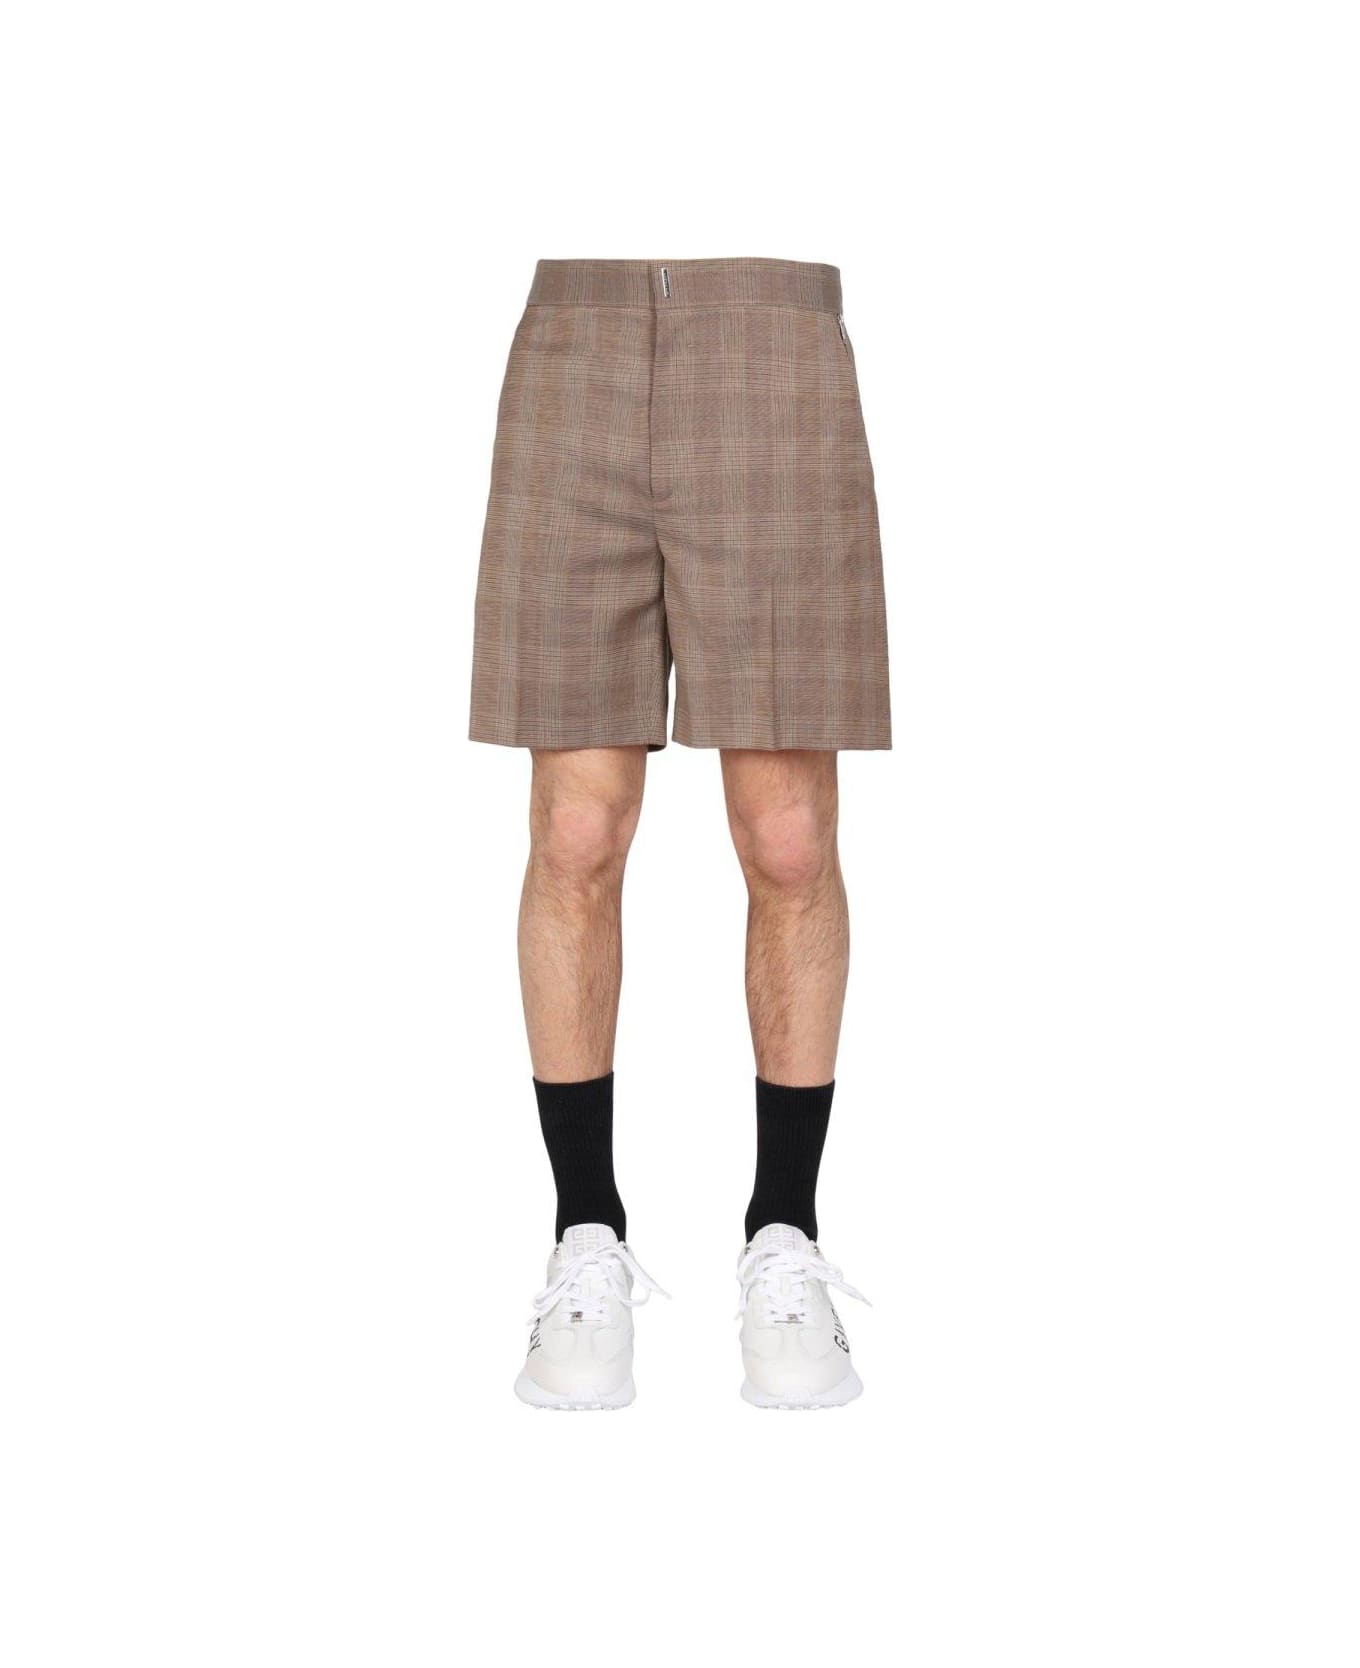 Givenchy Prince Of Wales Pattern Bermuda Shorts - BEIGE